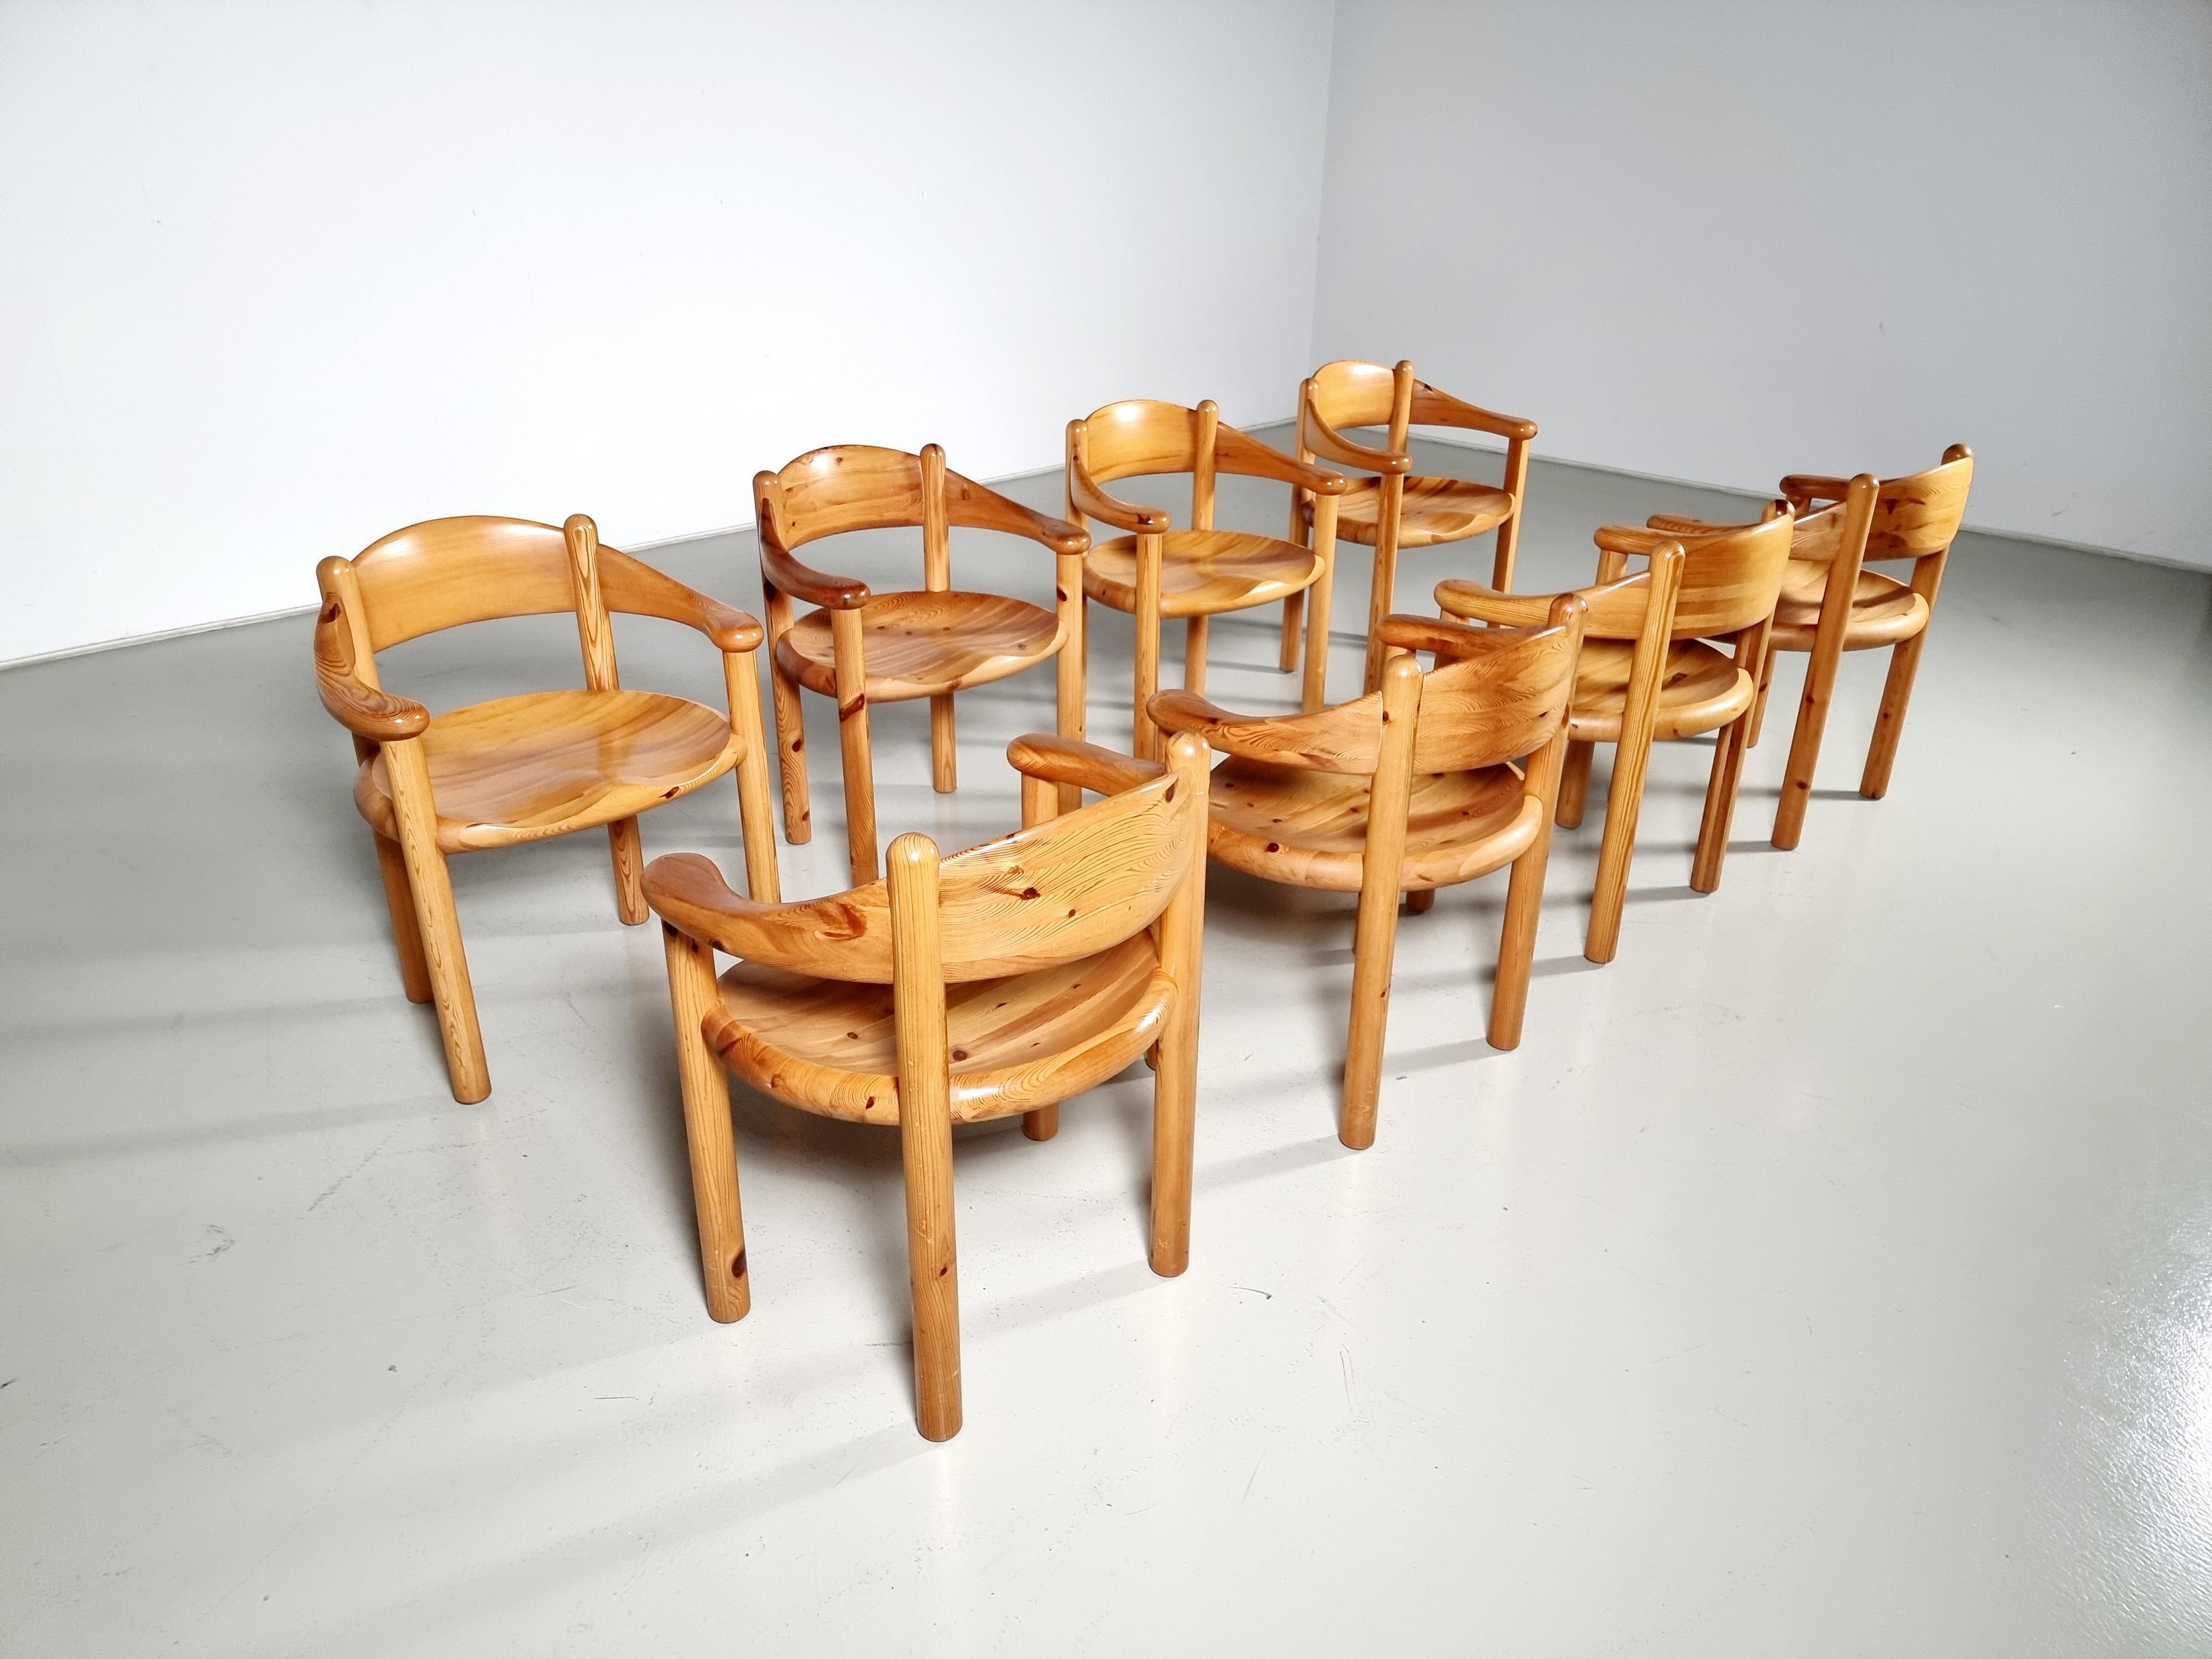 Fantastic set of 8 solid pine wood chairs, designed in the 60s by Rainer Daumiller for Hirtshals Savværk . The design is clearly inspired by Charlotte Perriand. Beautiful organic shape and a very nice grain on the wood. Really comfortable as well.